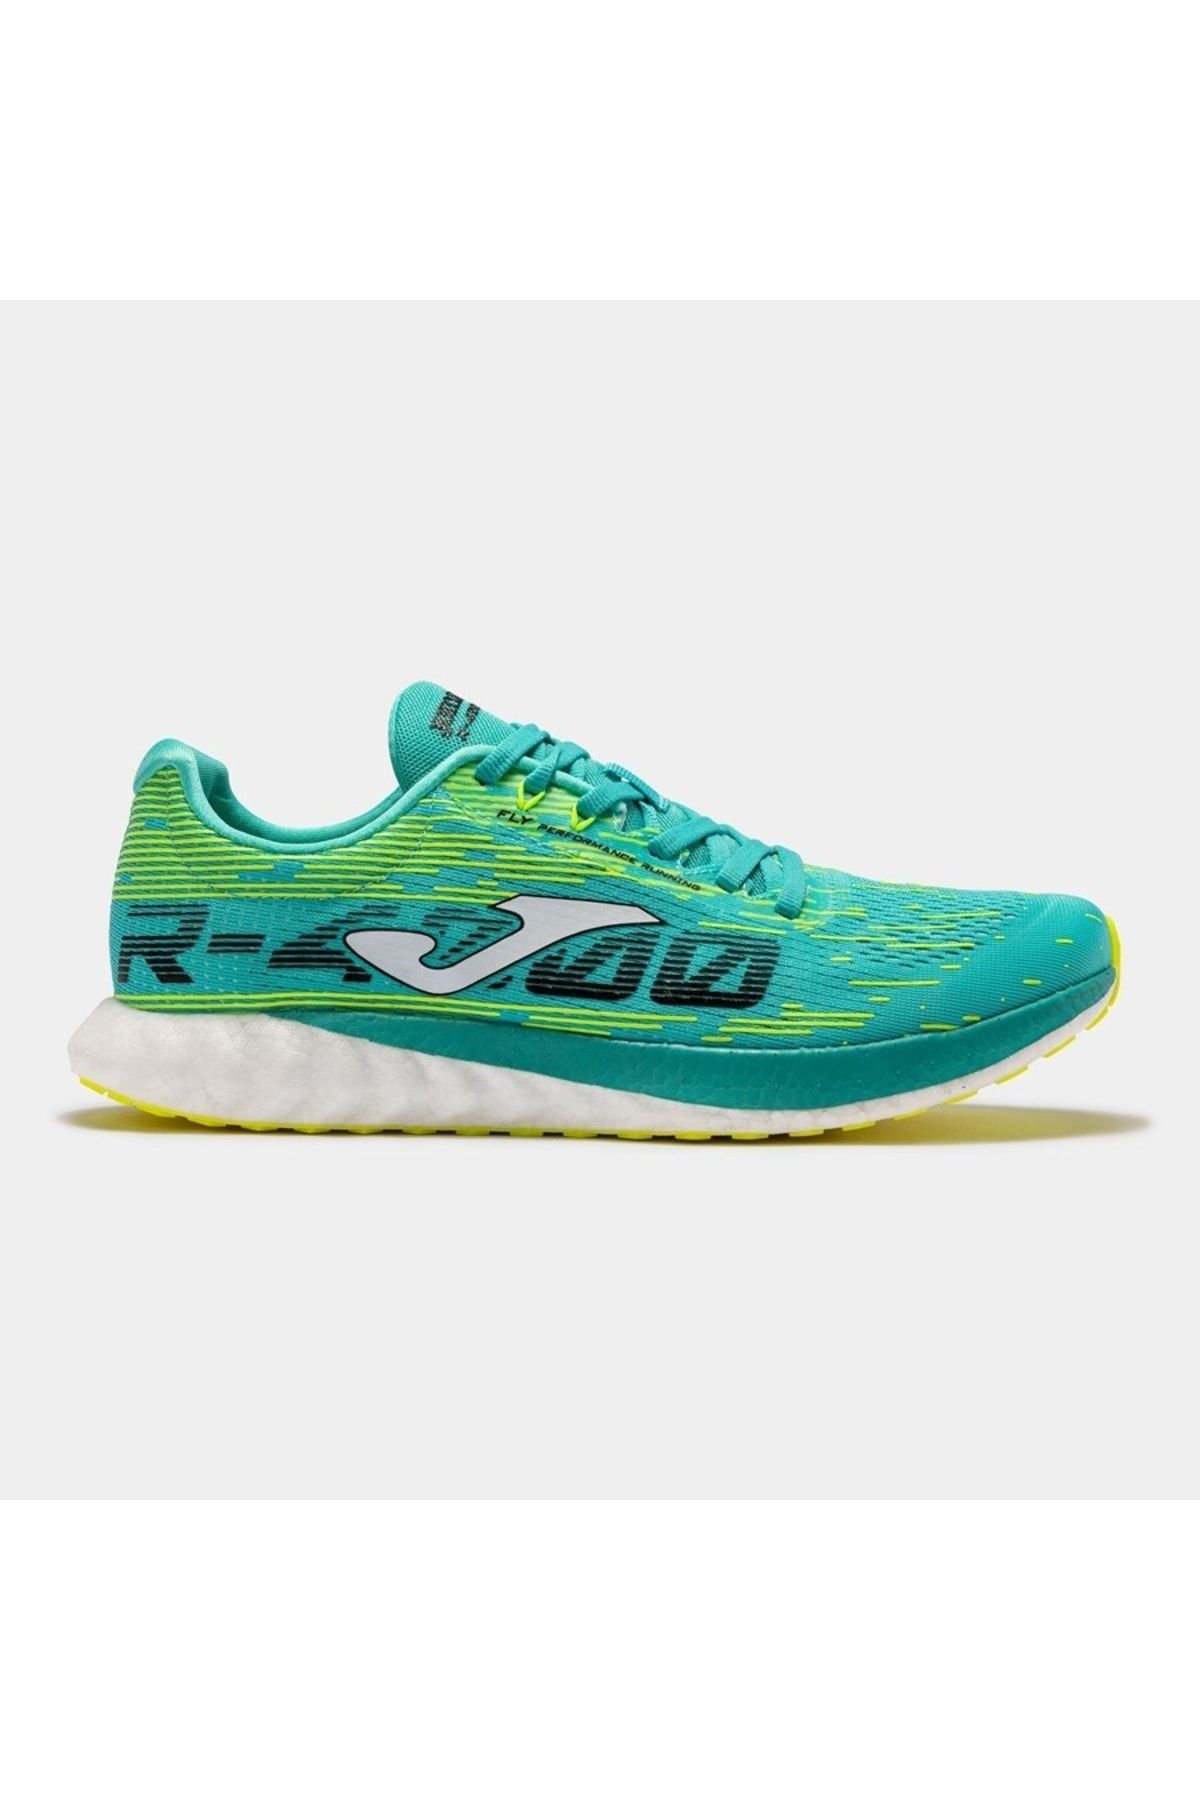 Joma R.4000 2317 Turquoise Sneaker